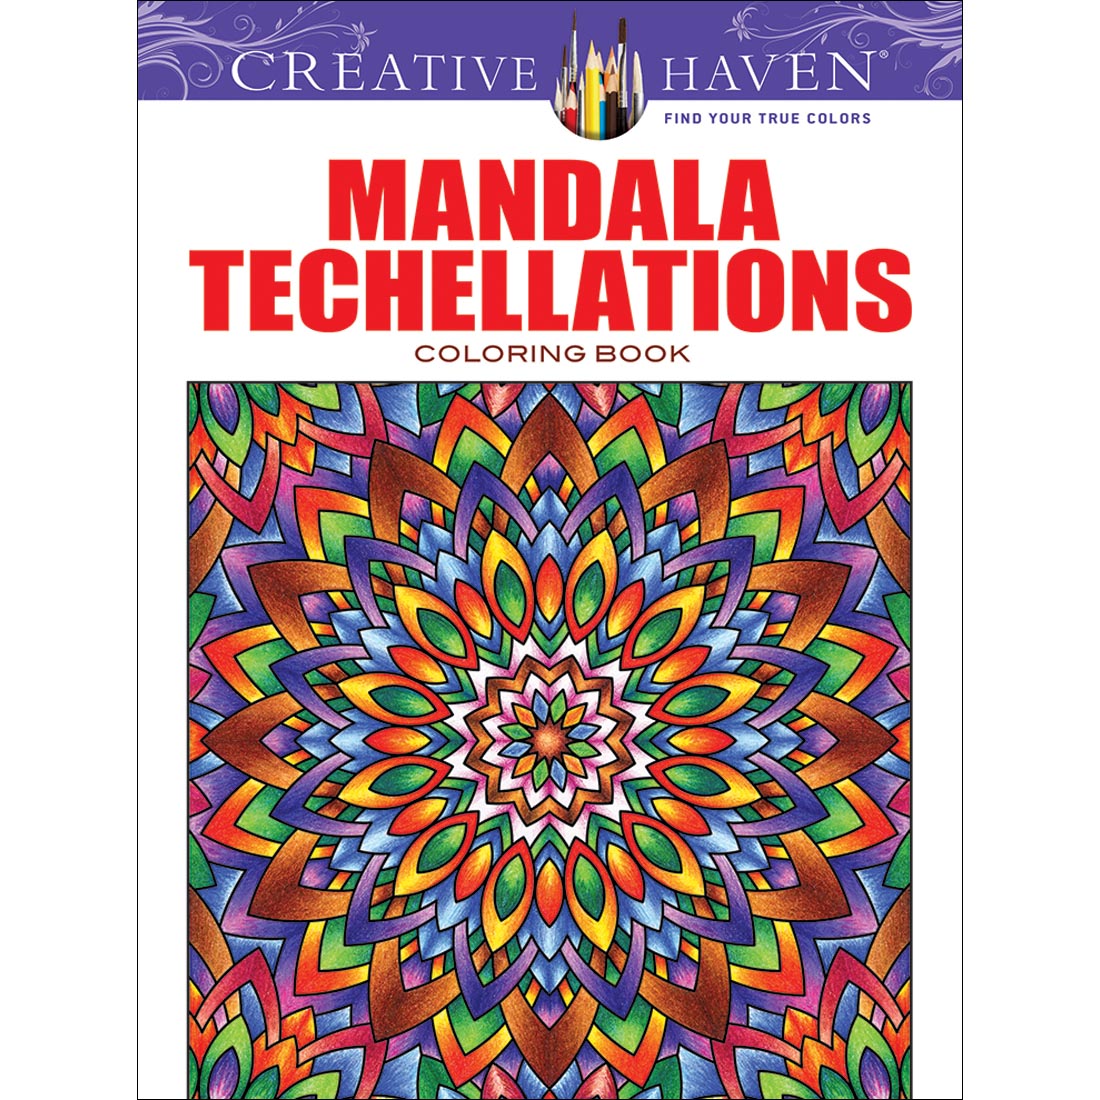 Creative Haven Mandala Techellations Coloring Book by Dover